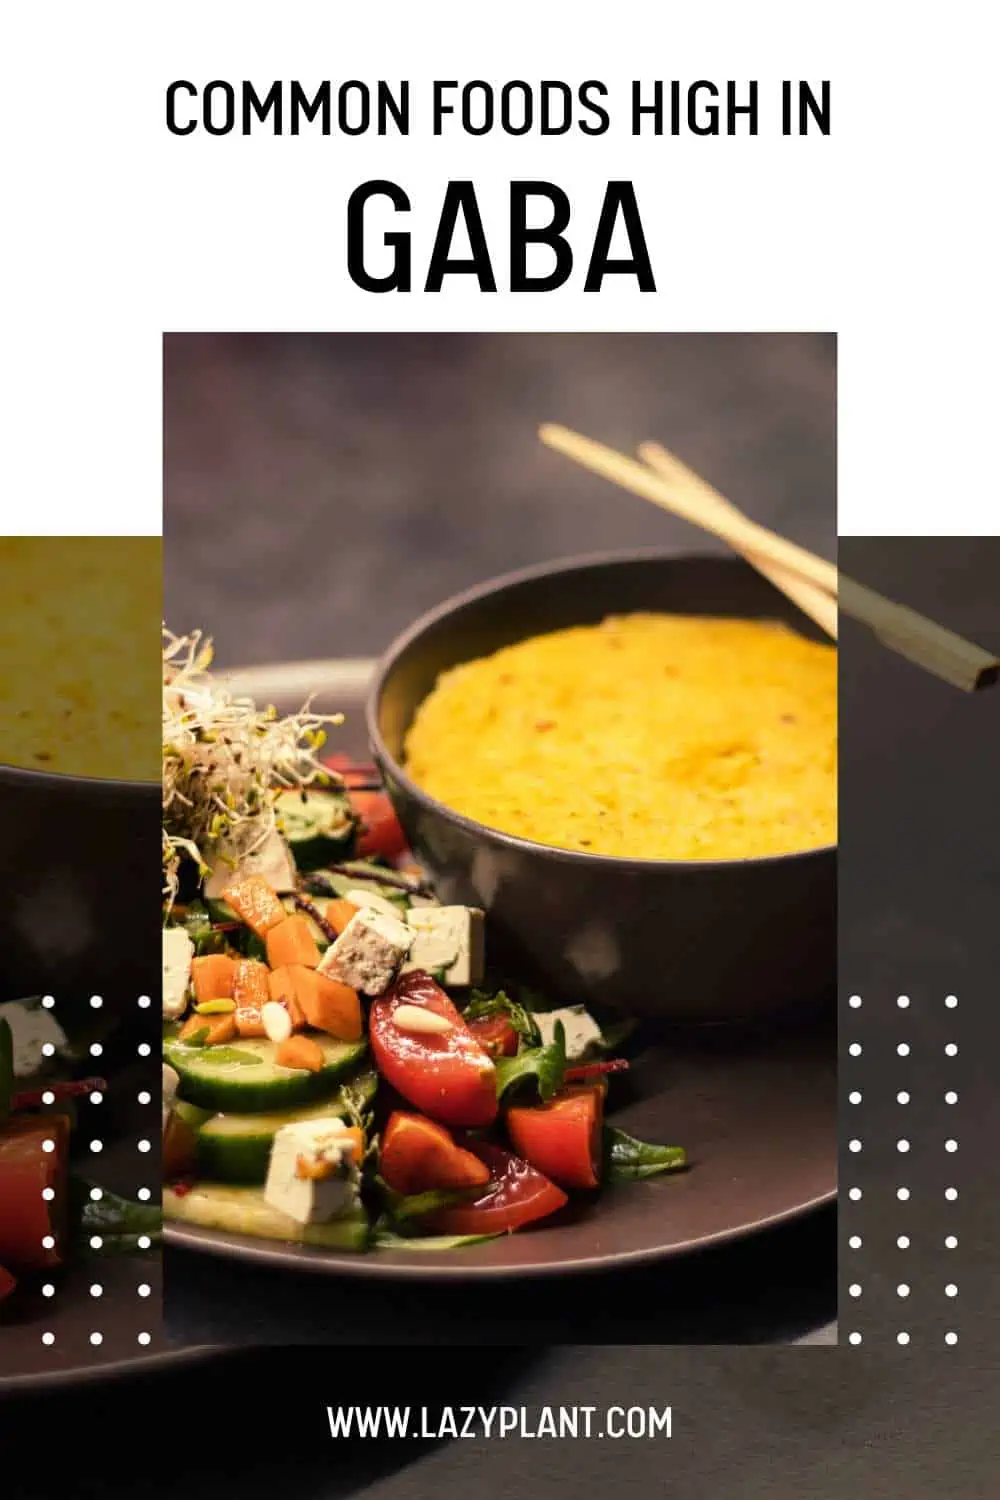 Get I get adequate amounts of GABA from foods?